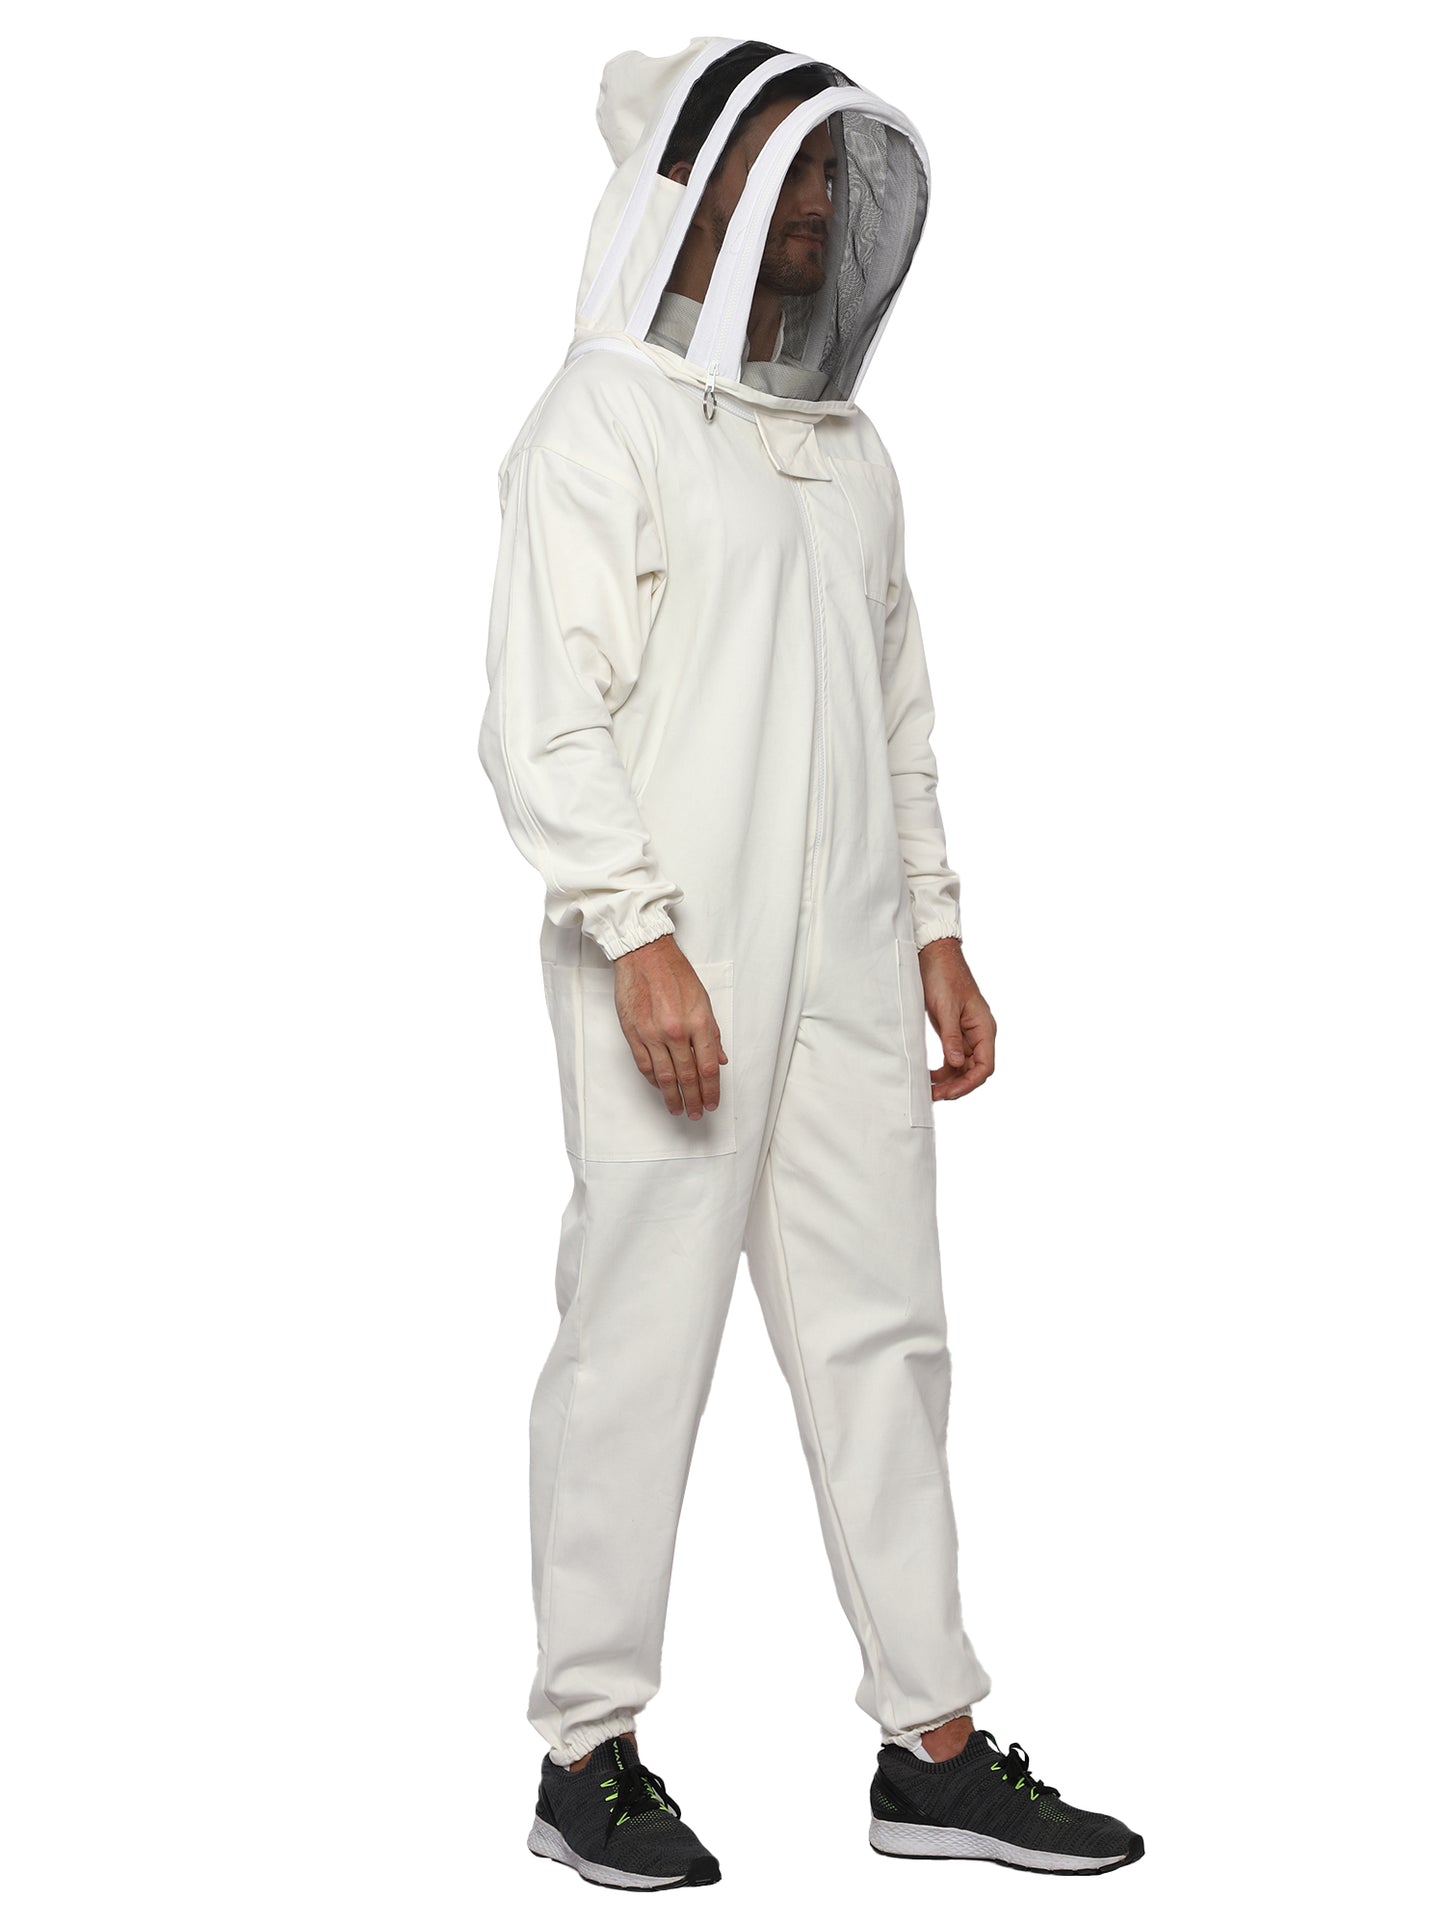 Bbeeattire Professional Beekeeper suit with Easy Veil- Thick Cotton Bee Suit Sting-Less Protection